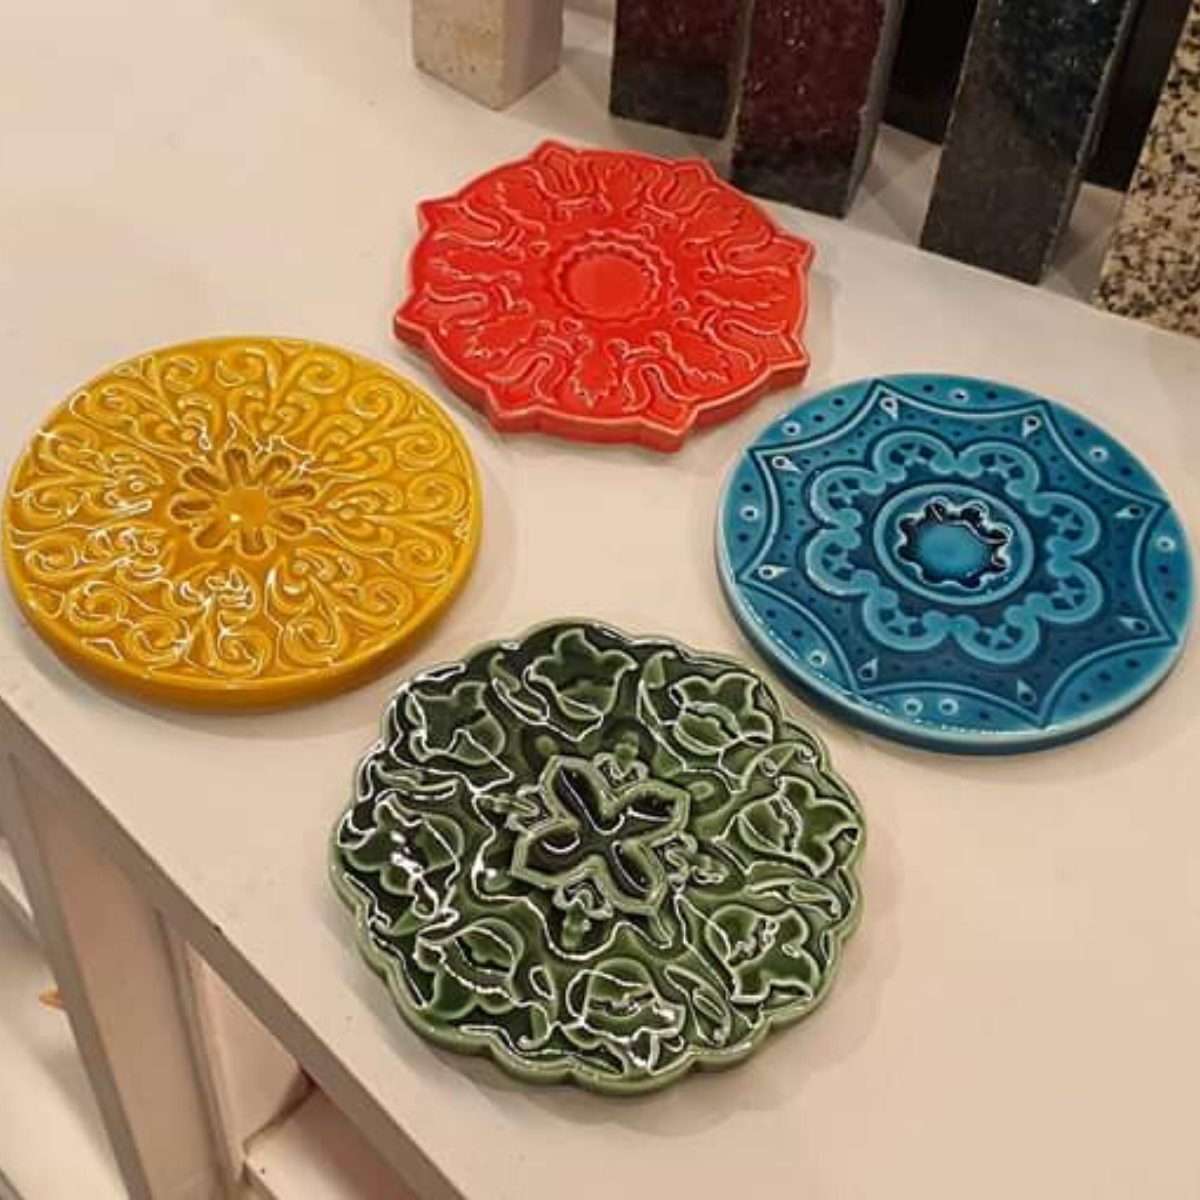 Glazed Faience Coasters | Coasters | Iberica - Pretty things from Portugal